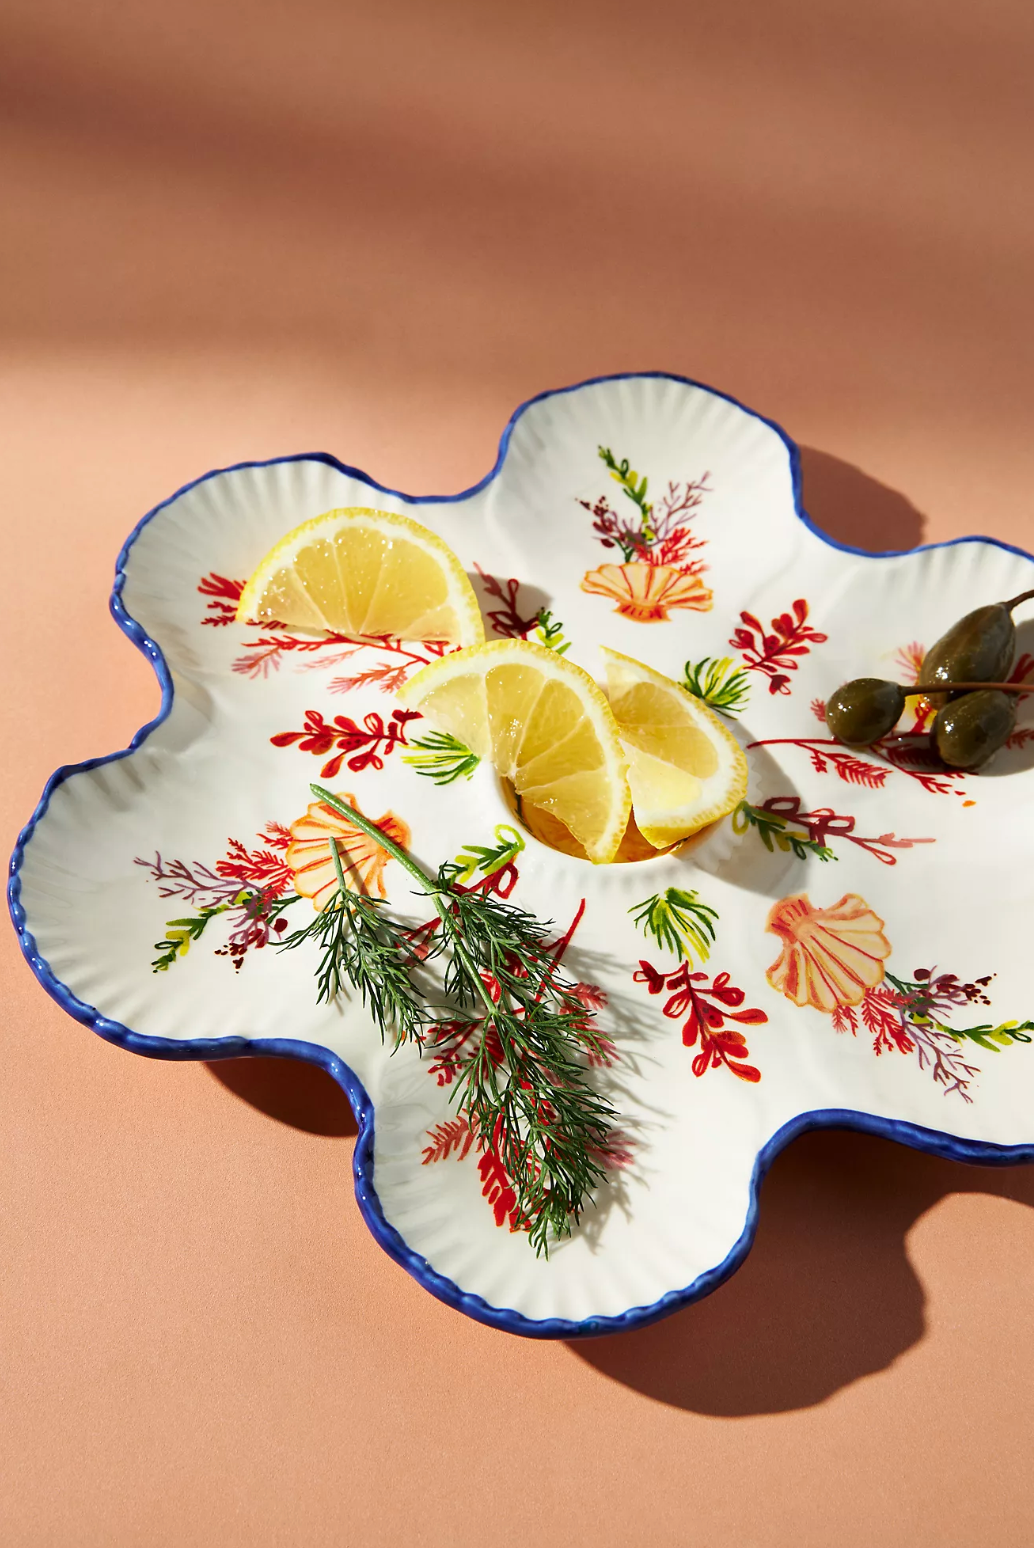 TikTok’s Favorite Mixologist Can’t Entertain Without This Oyster Platter